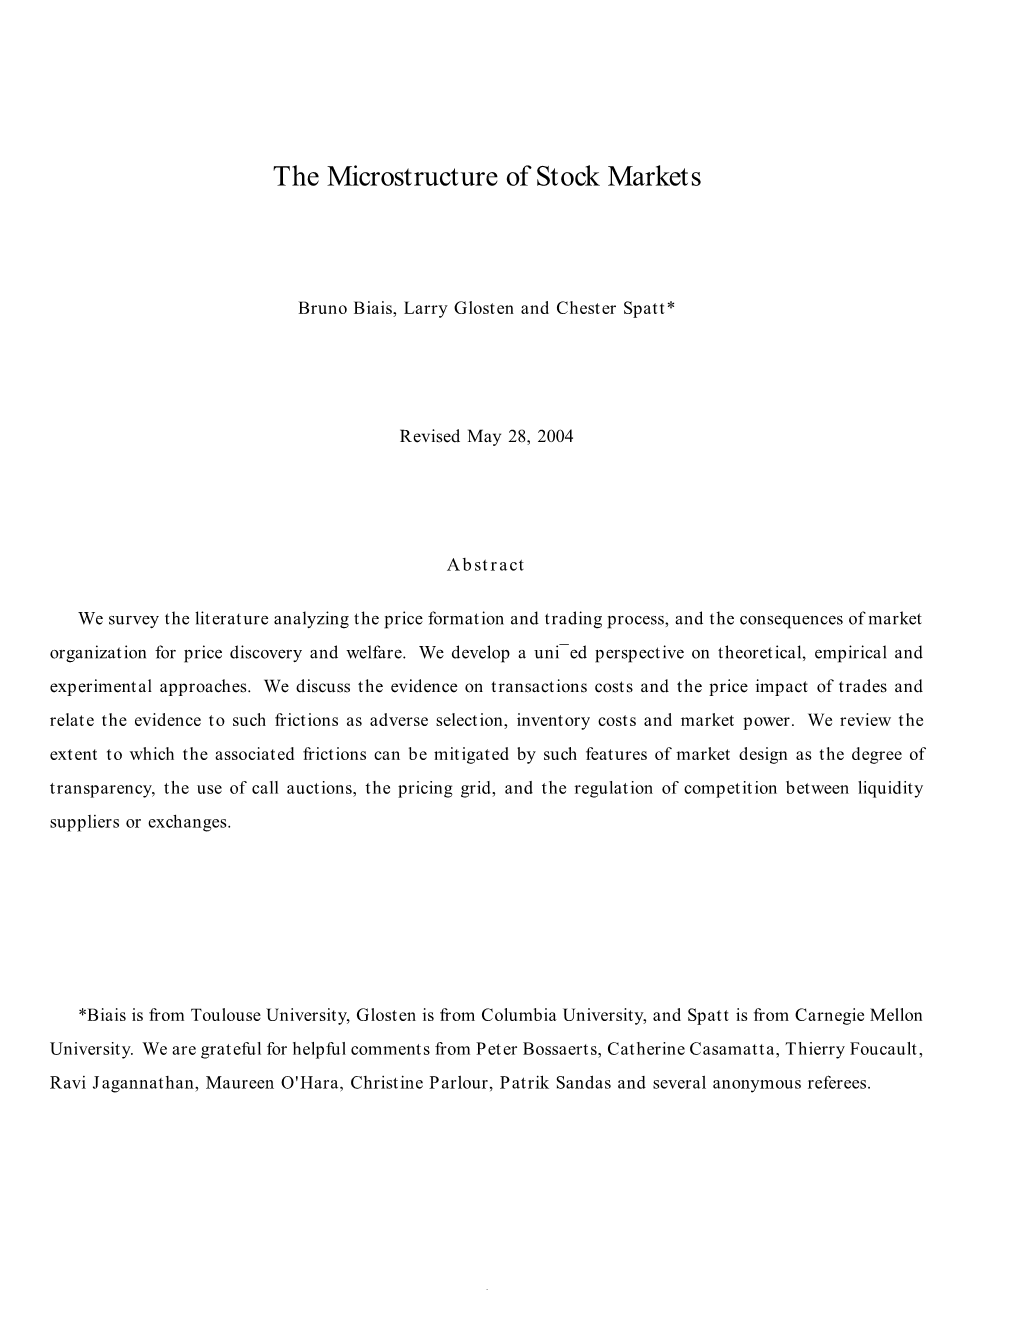 The Microstructure of Stock Markets